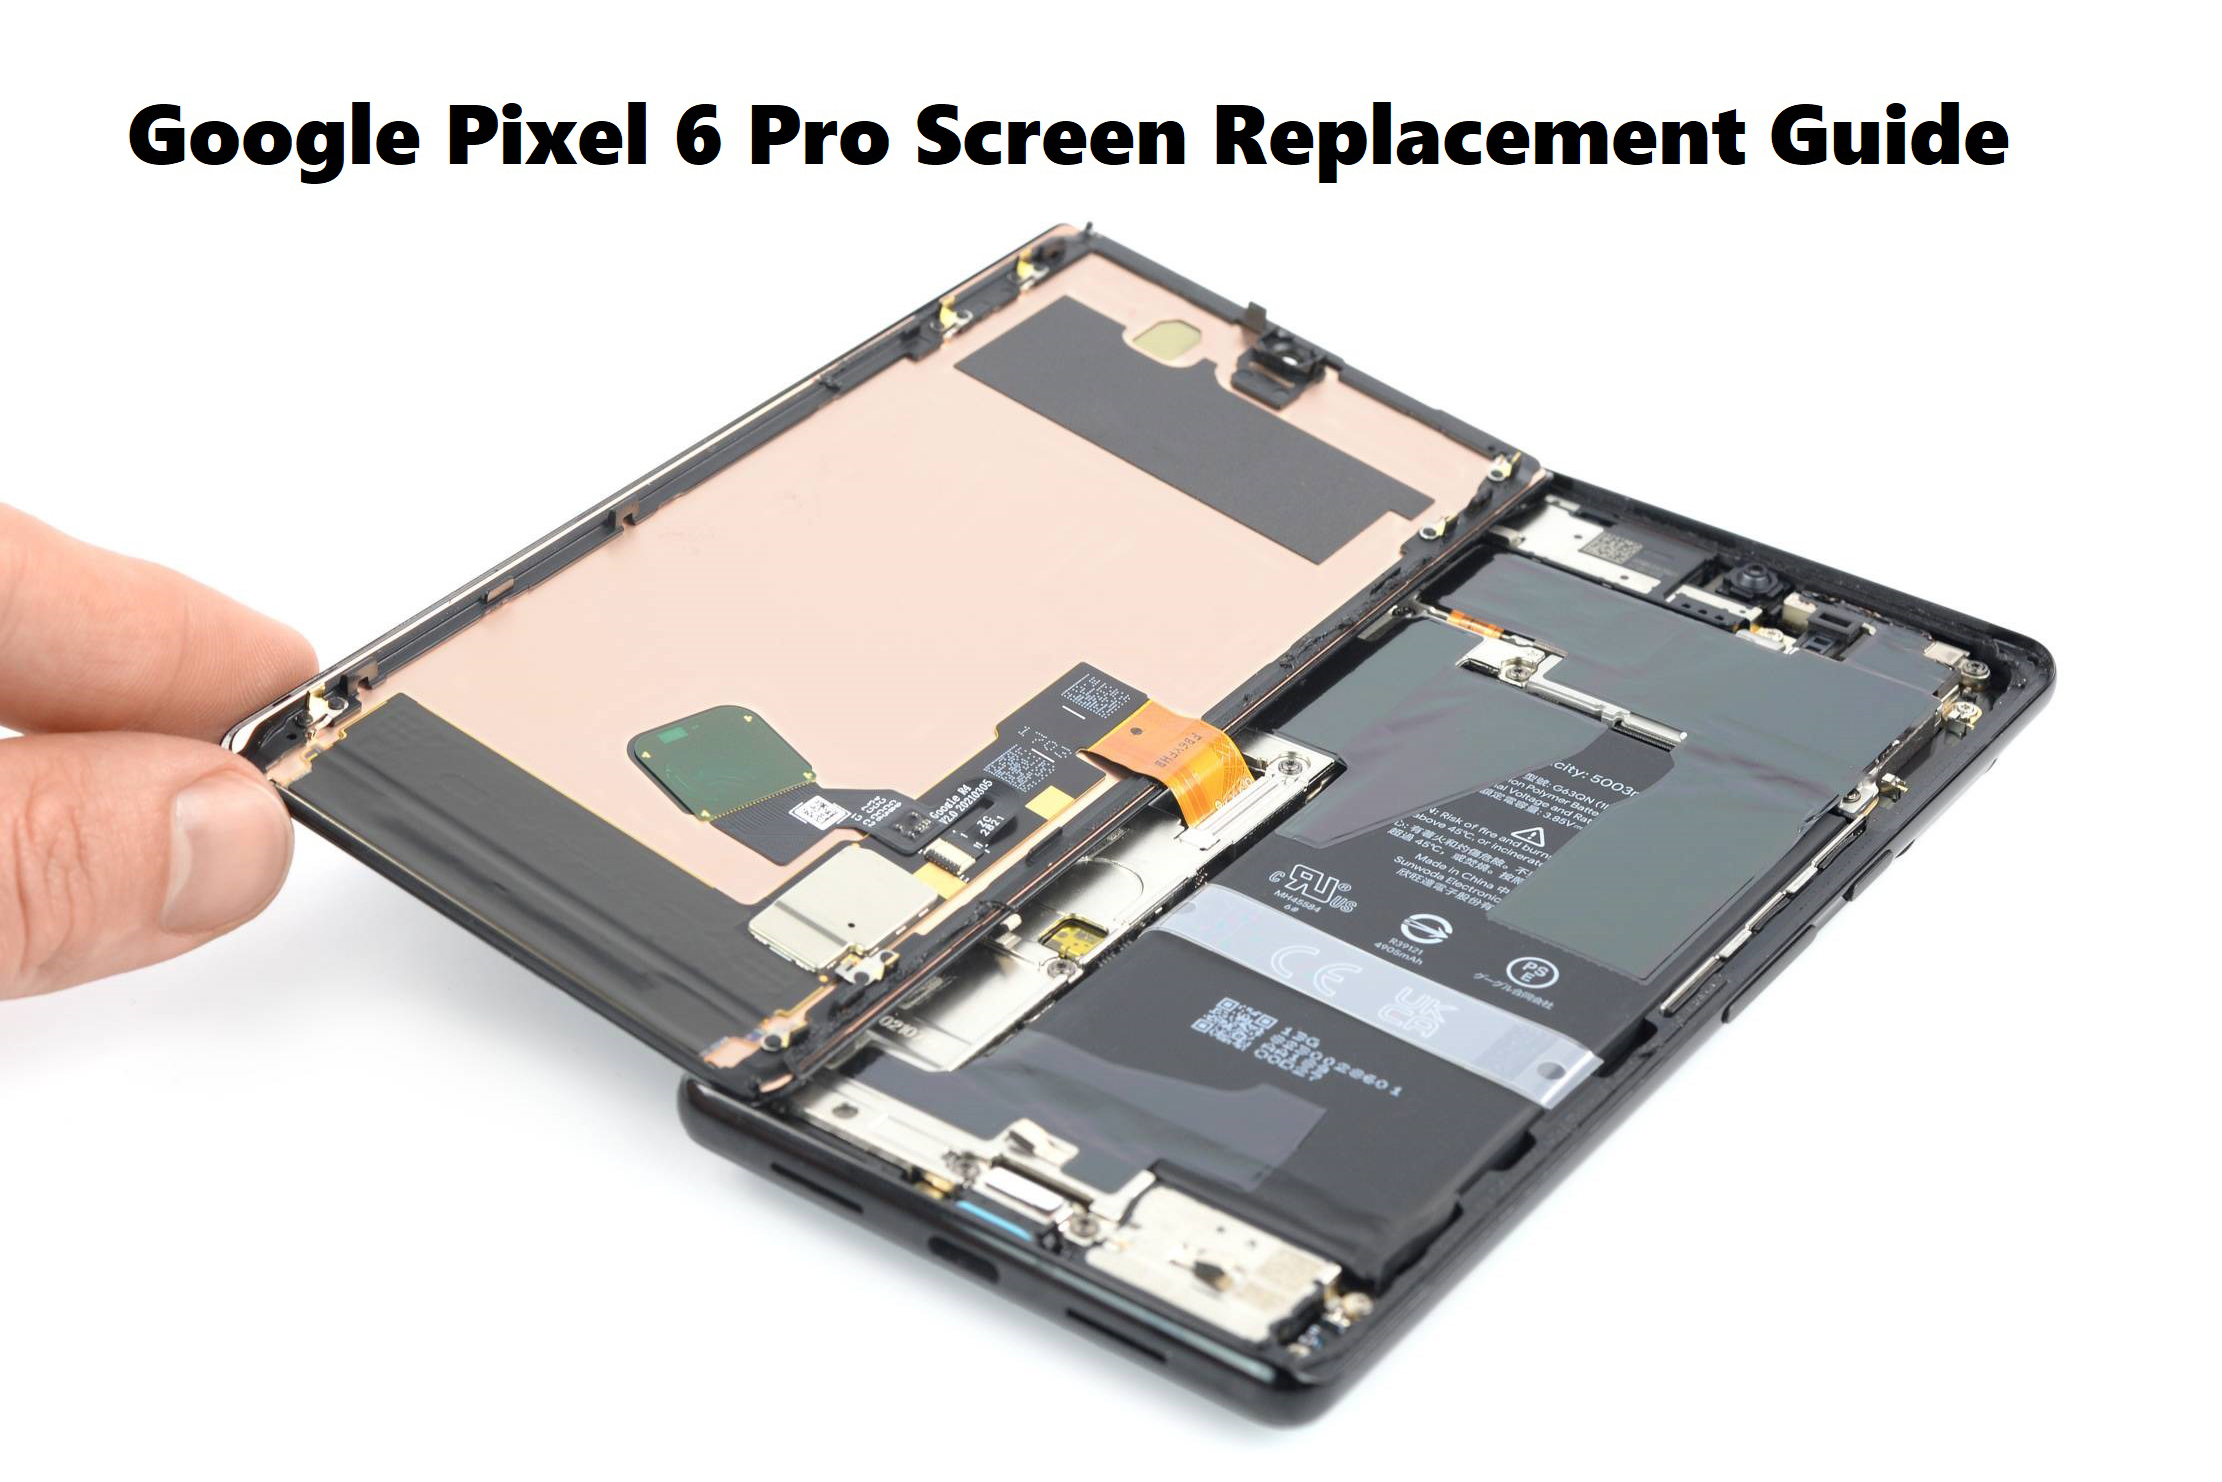 Google Pixel 6 Pro Screen Replacement Guide